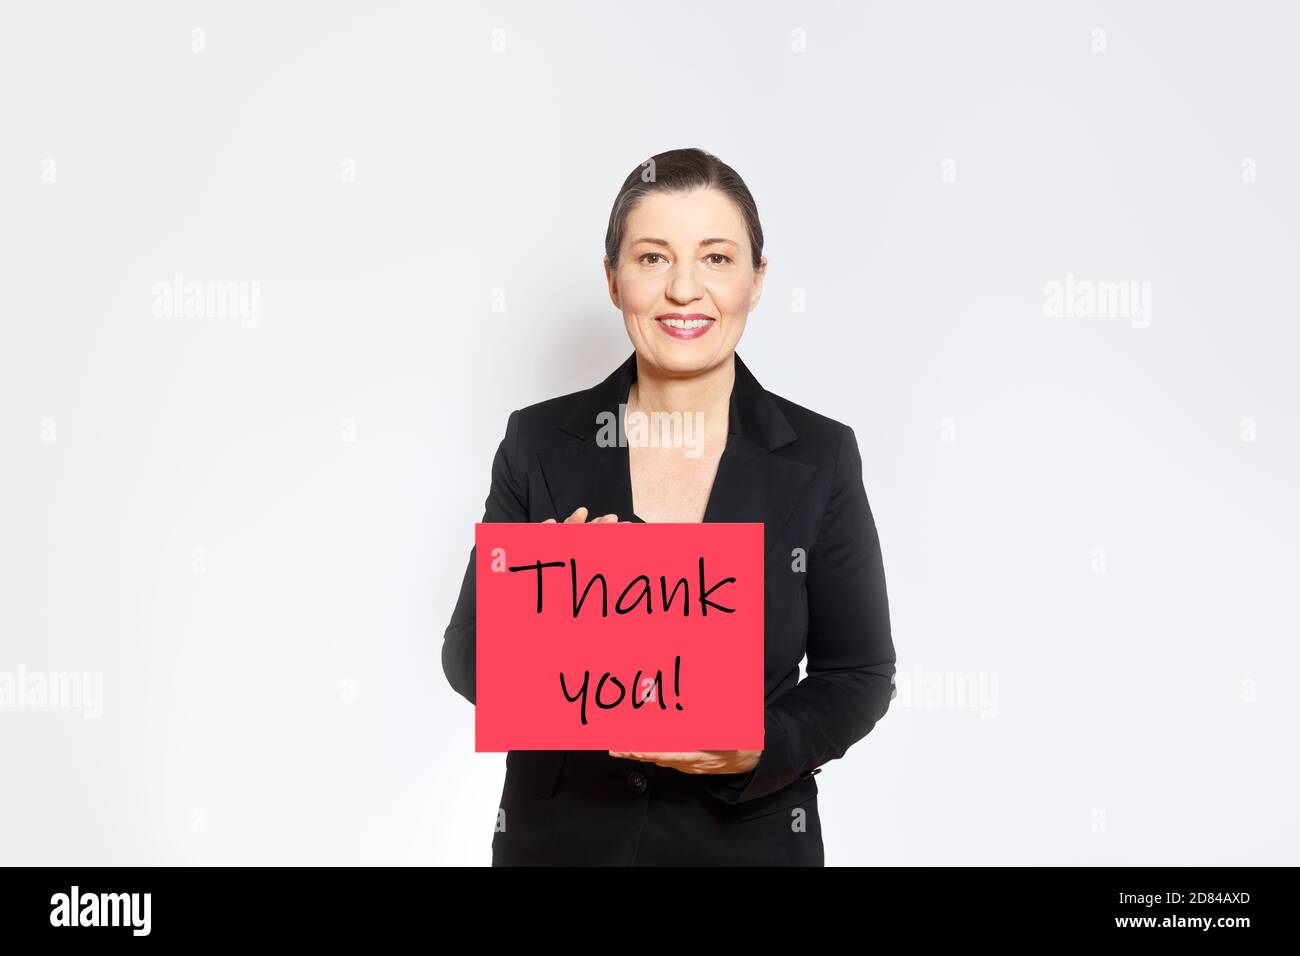 Smiling employer in black business outfit holding up a red card with text Thank you! Stock Photo